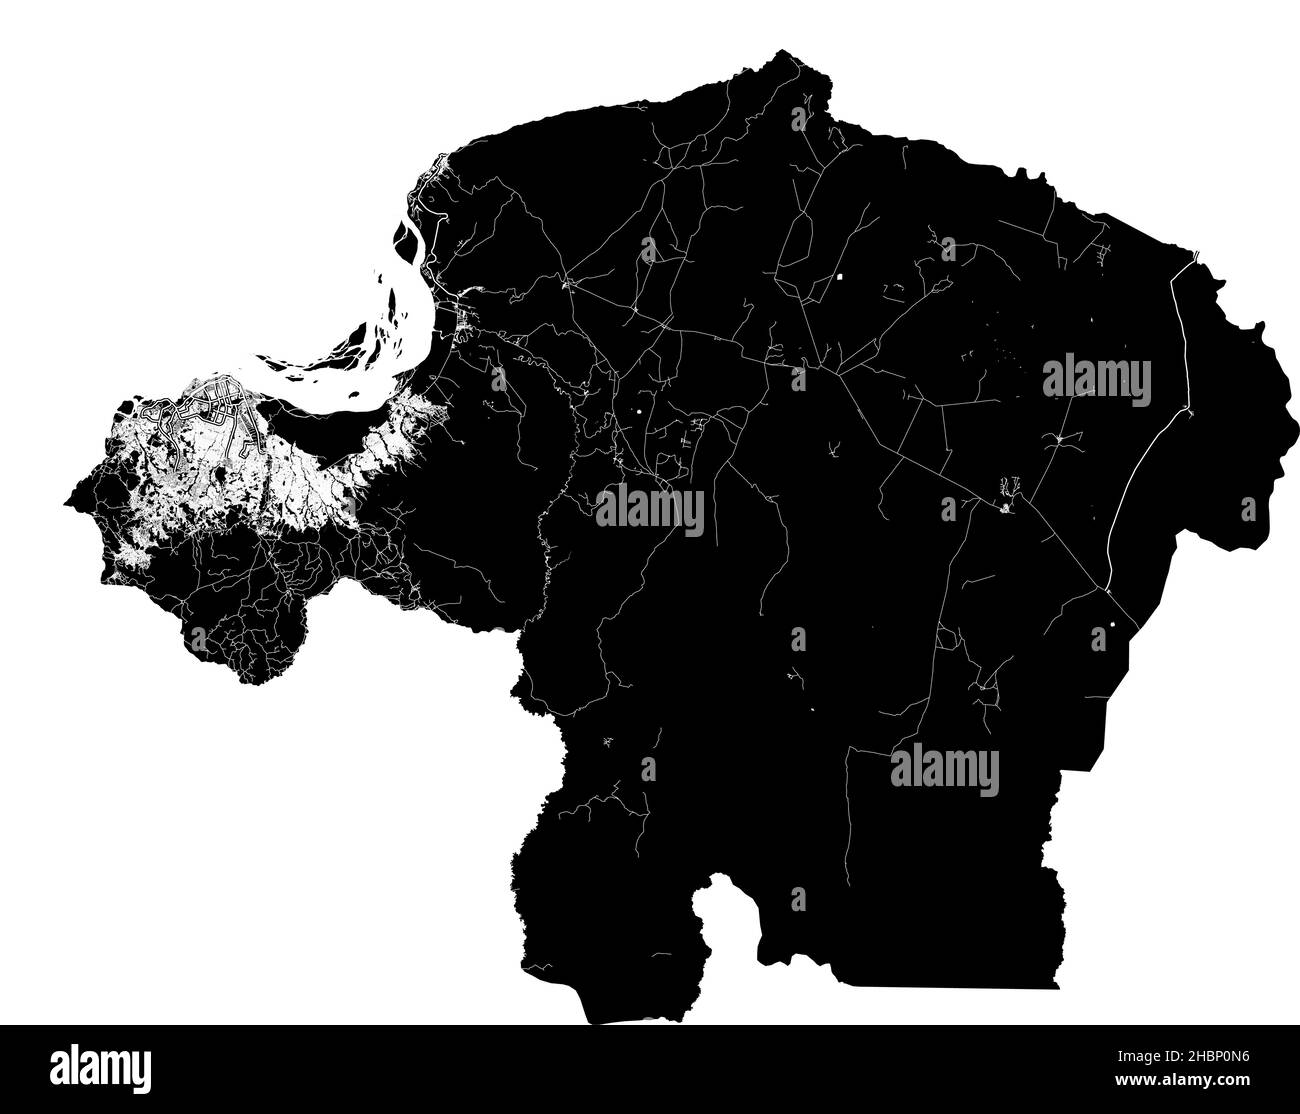 Kinshasa, DR Congo, high resolution vector map with city boundaries, and editable paths. The city map was drawn with white areas and lines for main ro Stock Vector